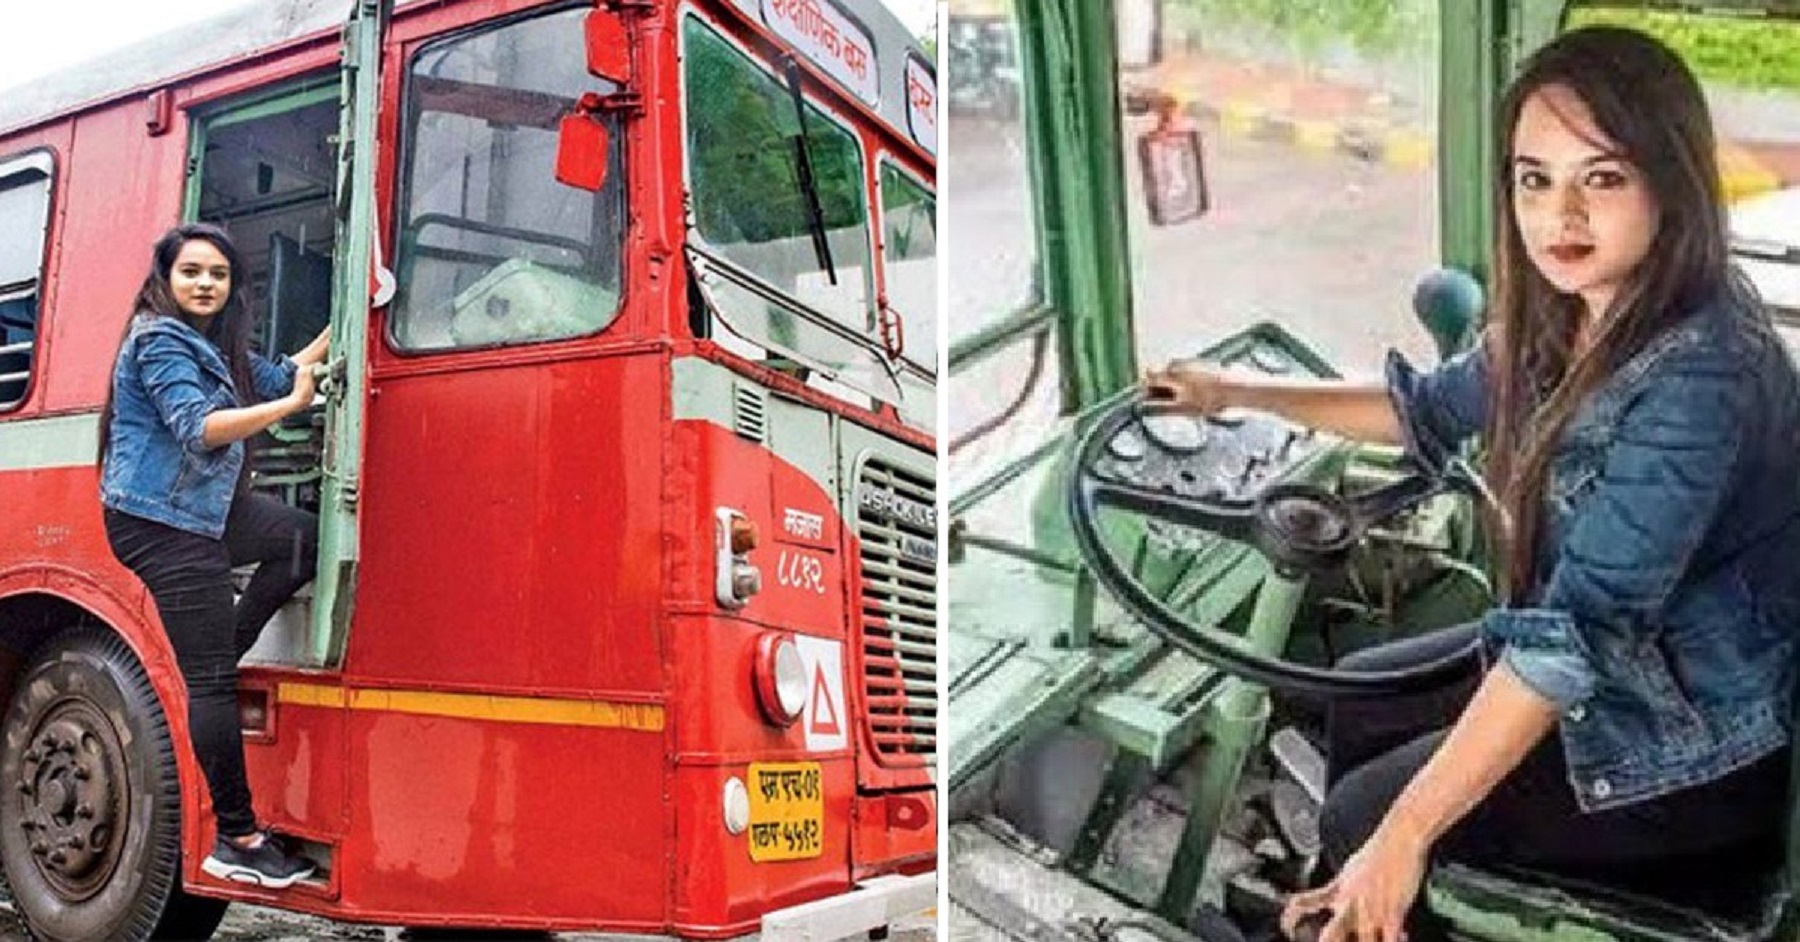 Breaking Stereotypes: 24-YO Girl from Mumbai, Becomes the City’s First Female Bus Driver